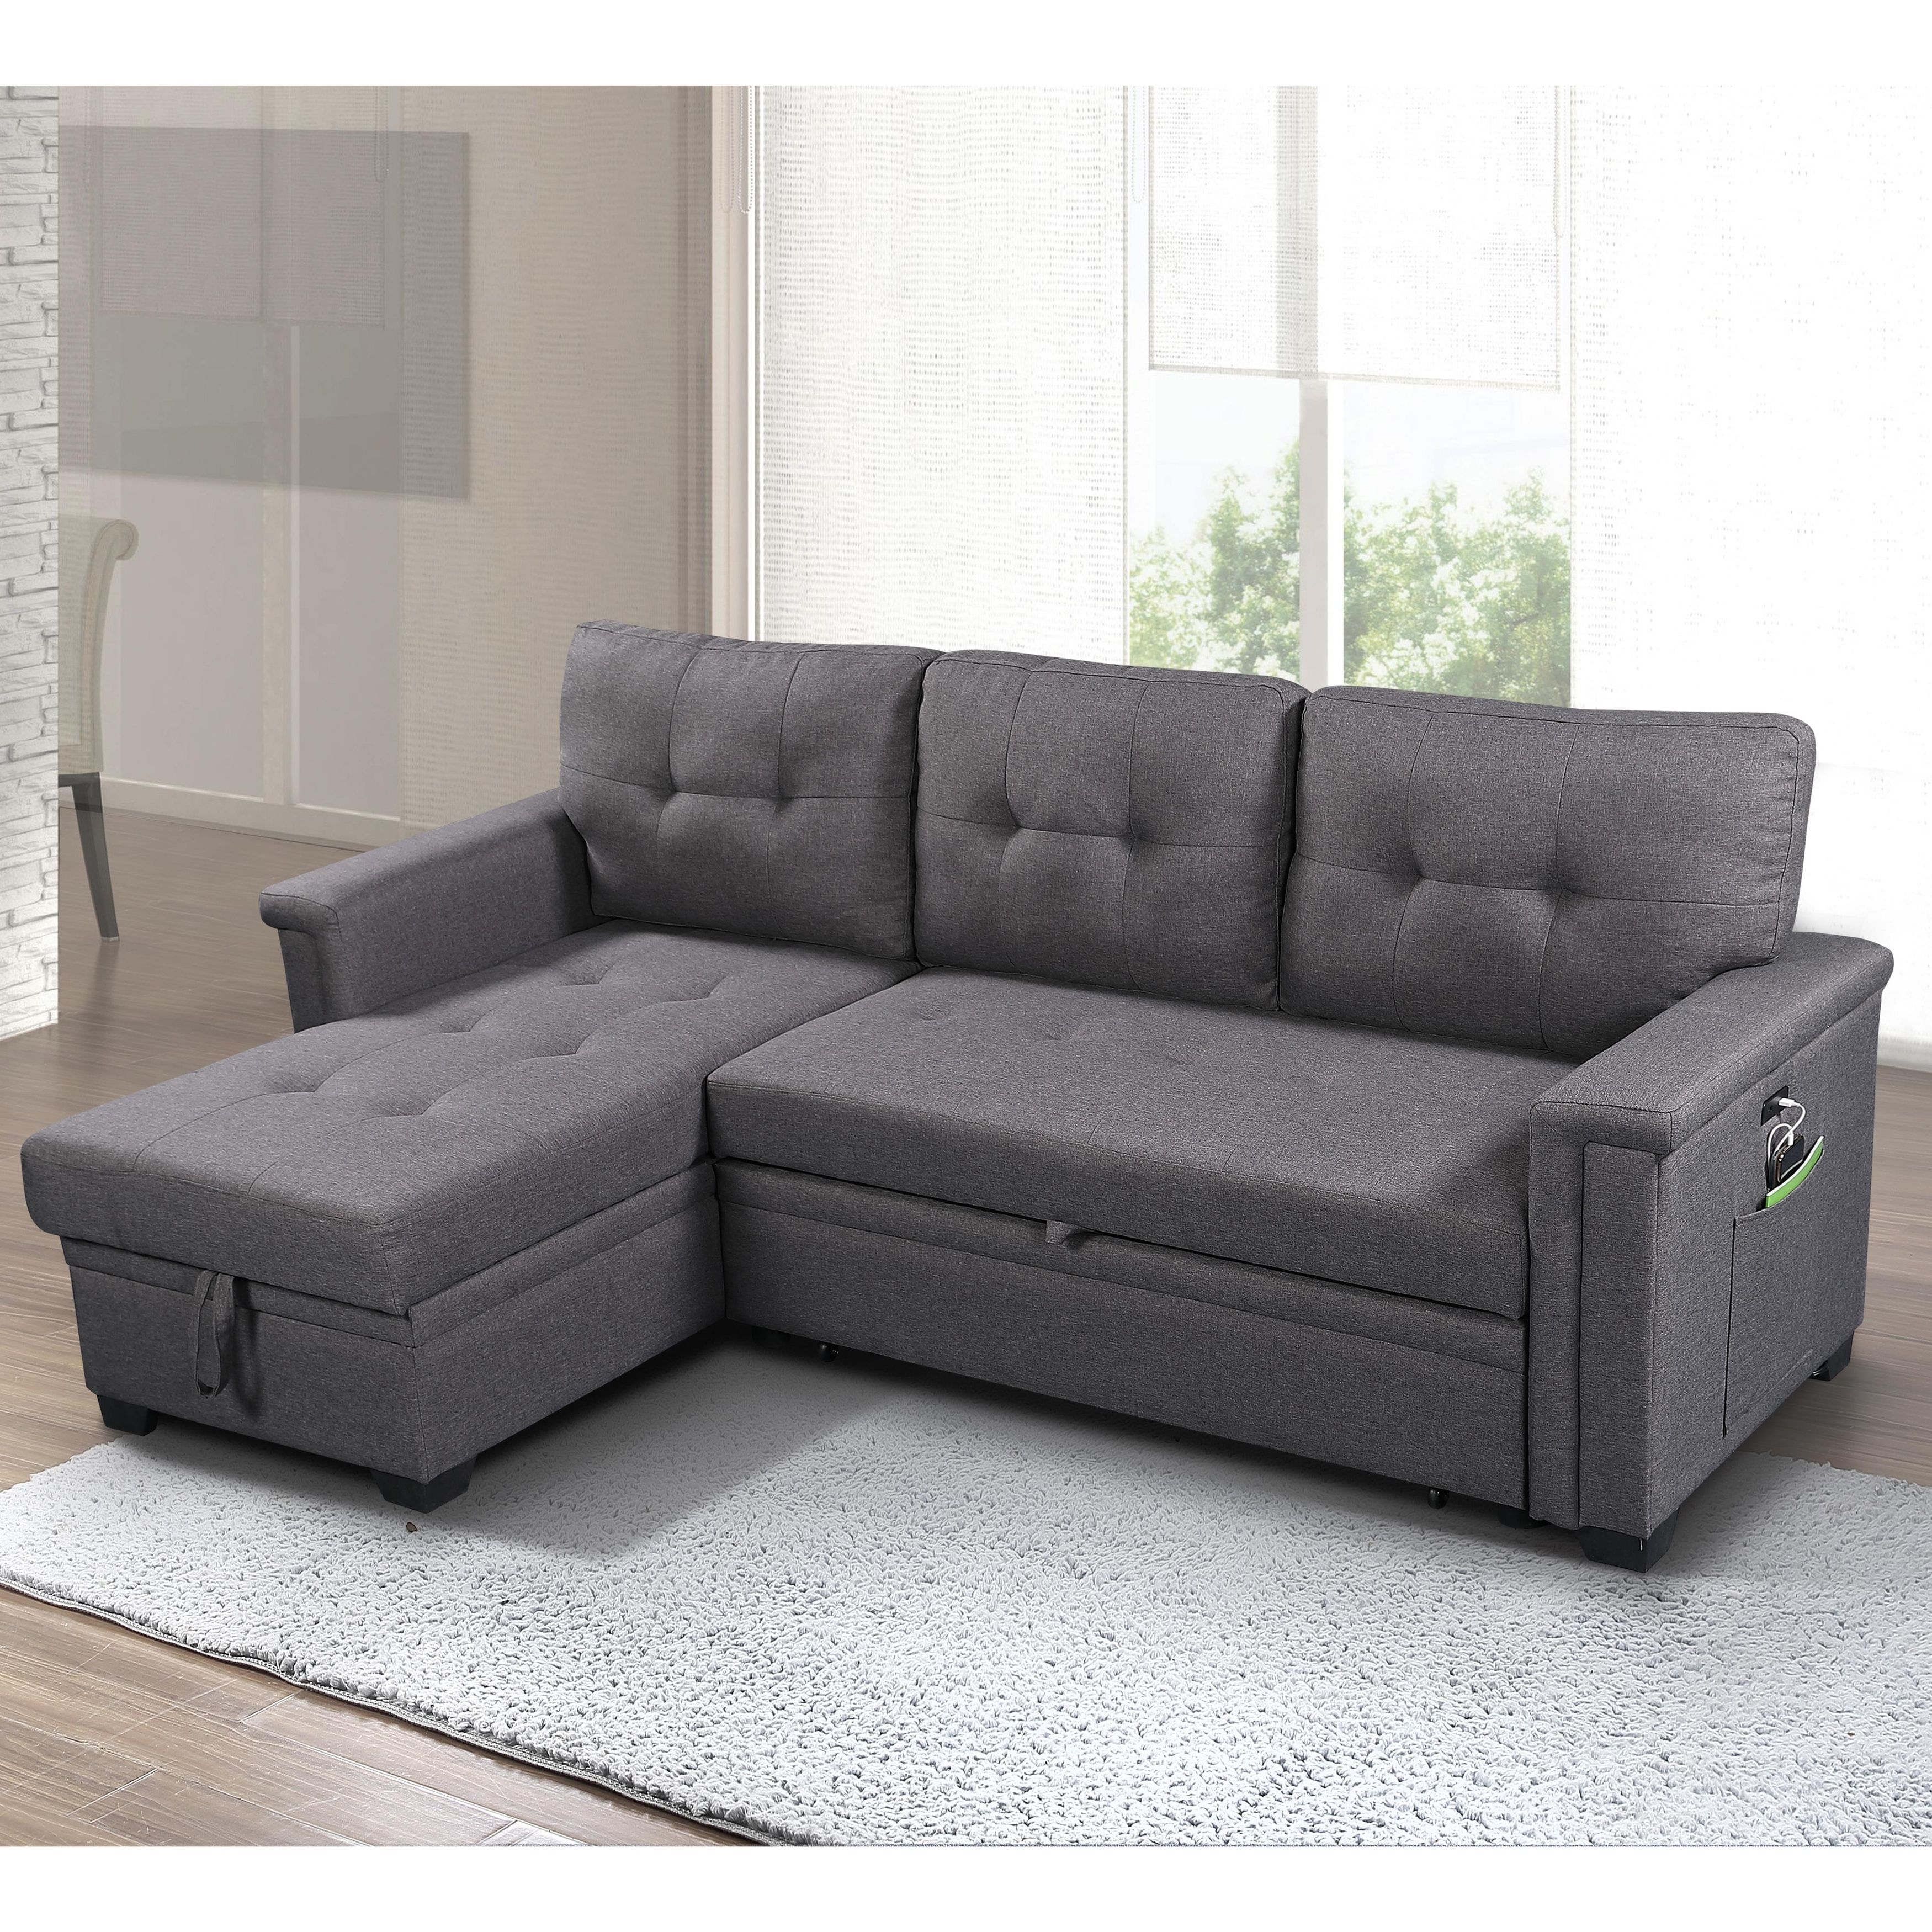 Ashlyn Reversible Sleeper Sofa With Storage Chaise – On Sale – – 30144937 Inside Convertible Sofas With Matching Chaise (View 6 of 20)